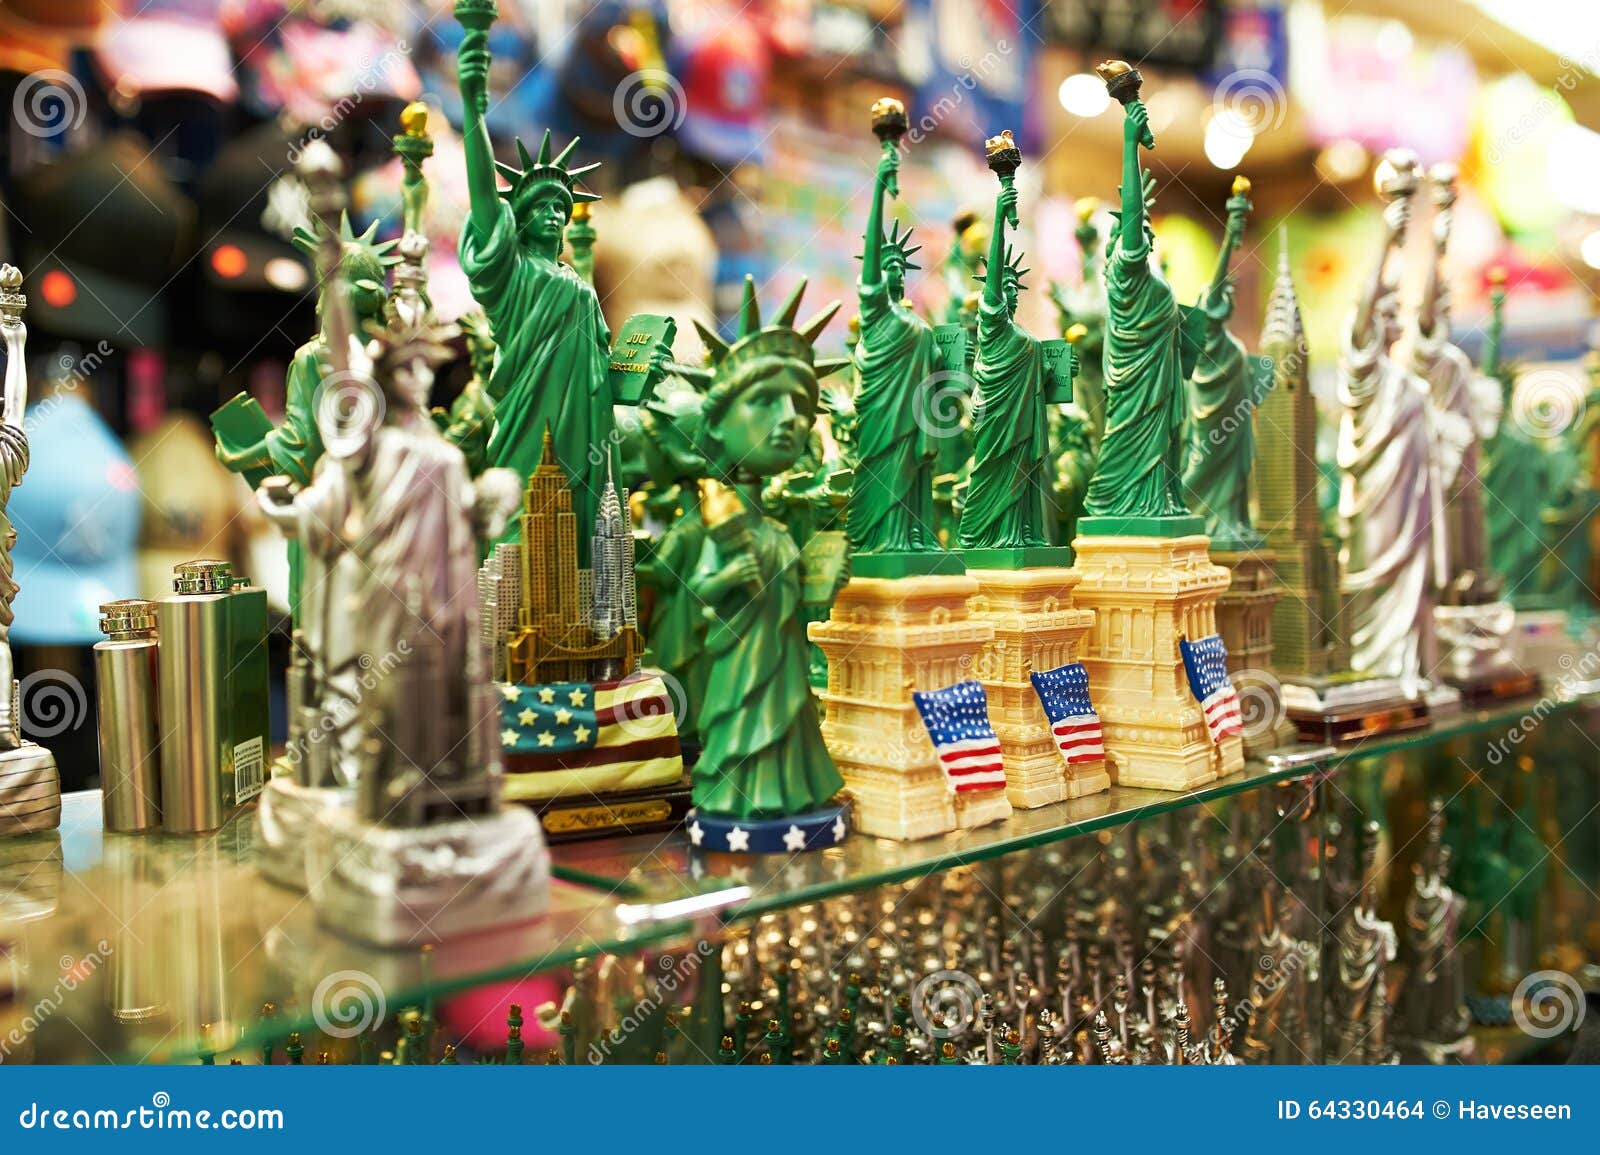 Statue Of Liberty Souvenirs At A Store In New York